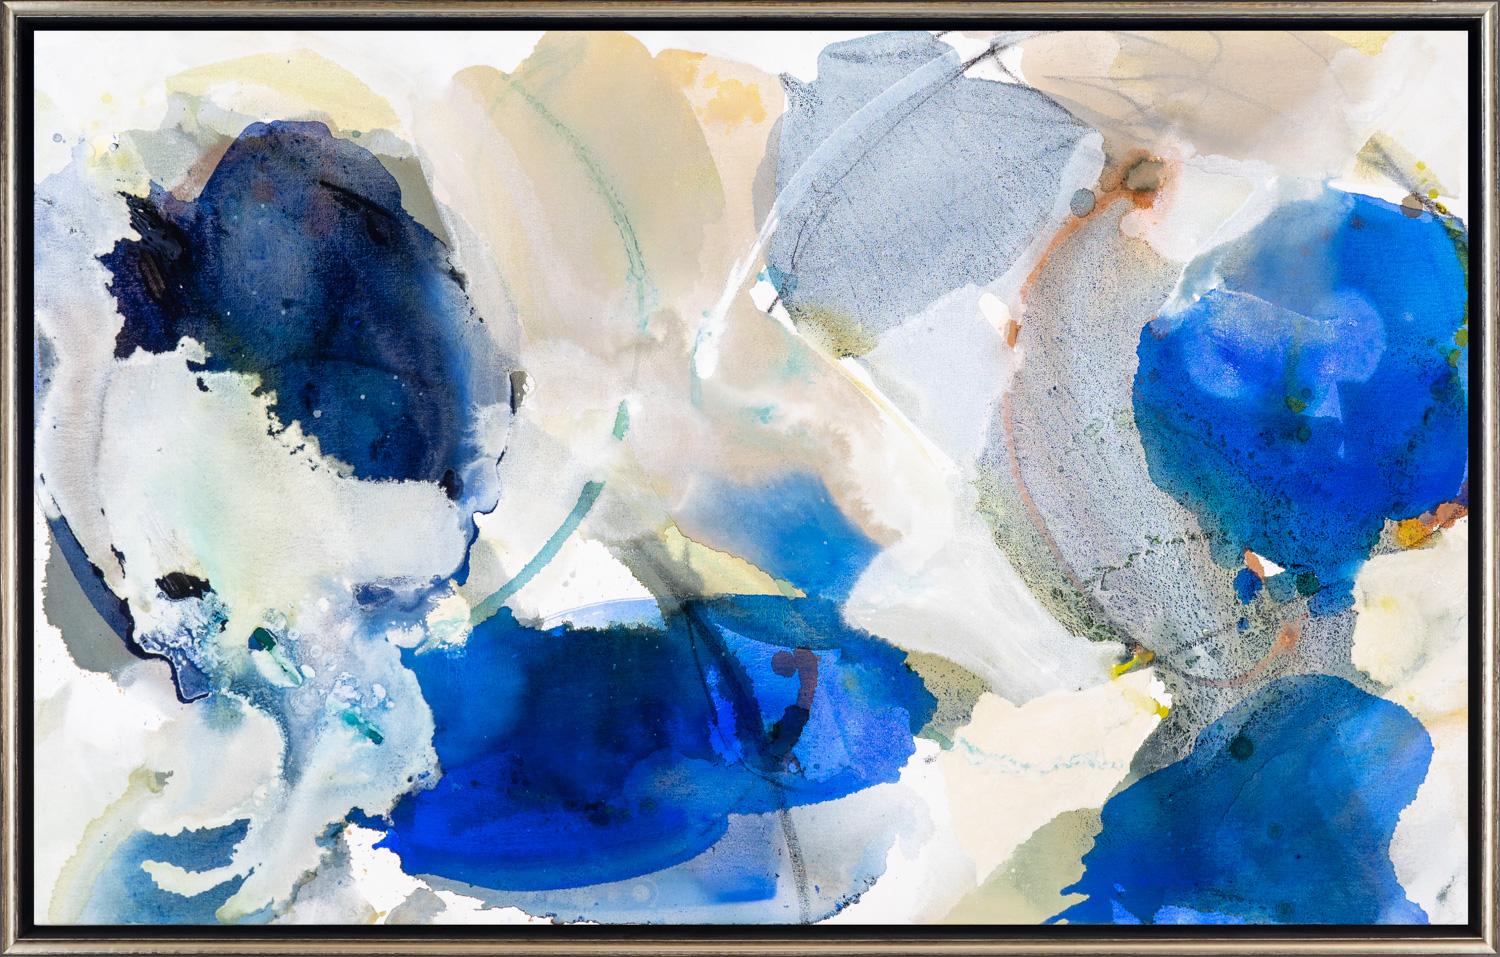 "Shade Petals 7" Blue Abstract Painting with Water-like Movement - Mixed Media Art by Liz Barber